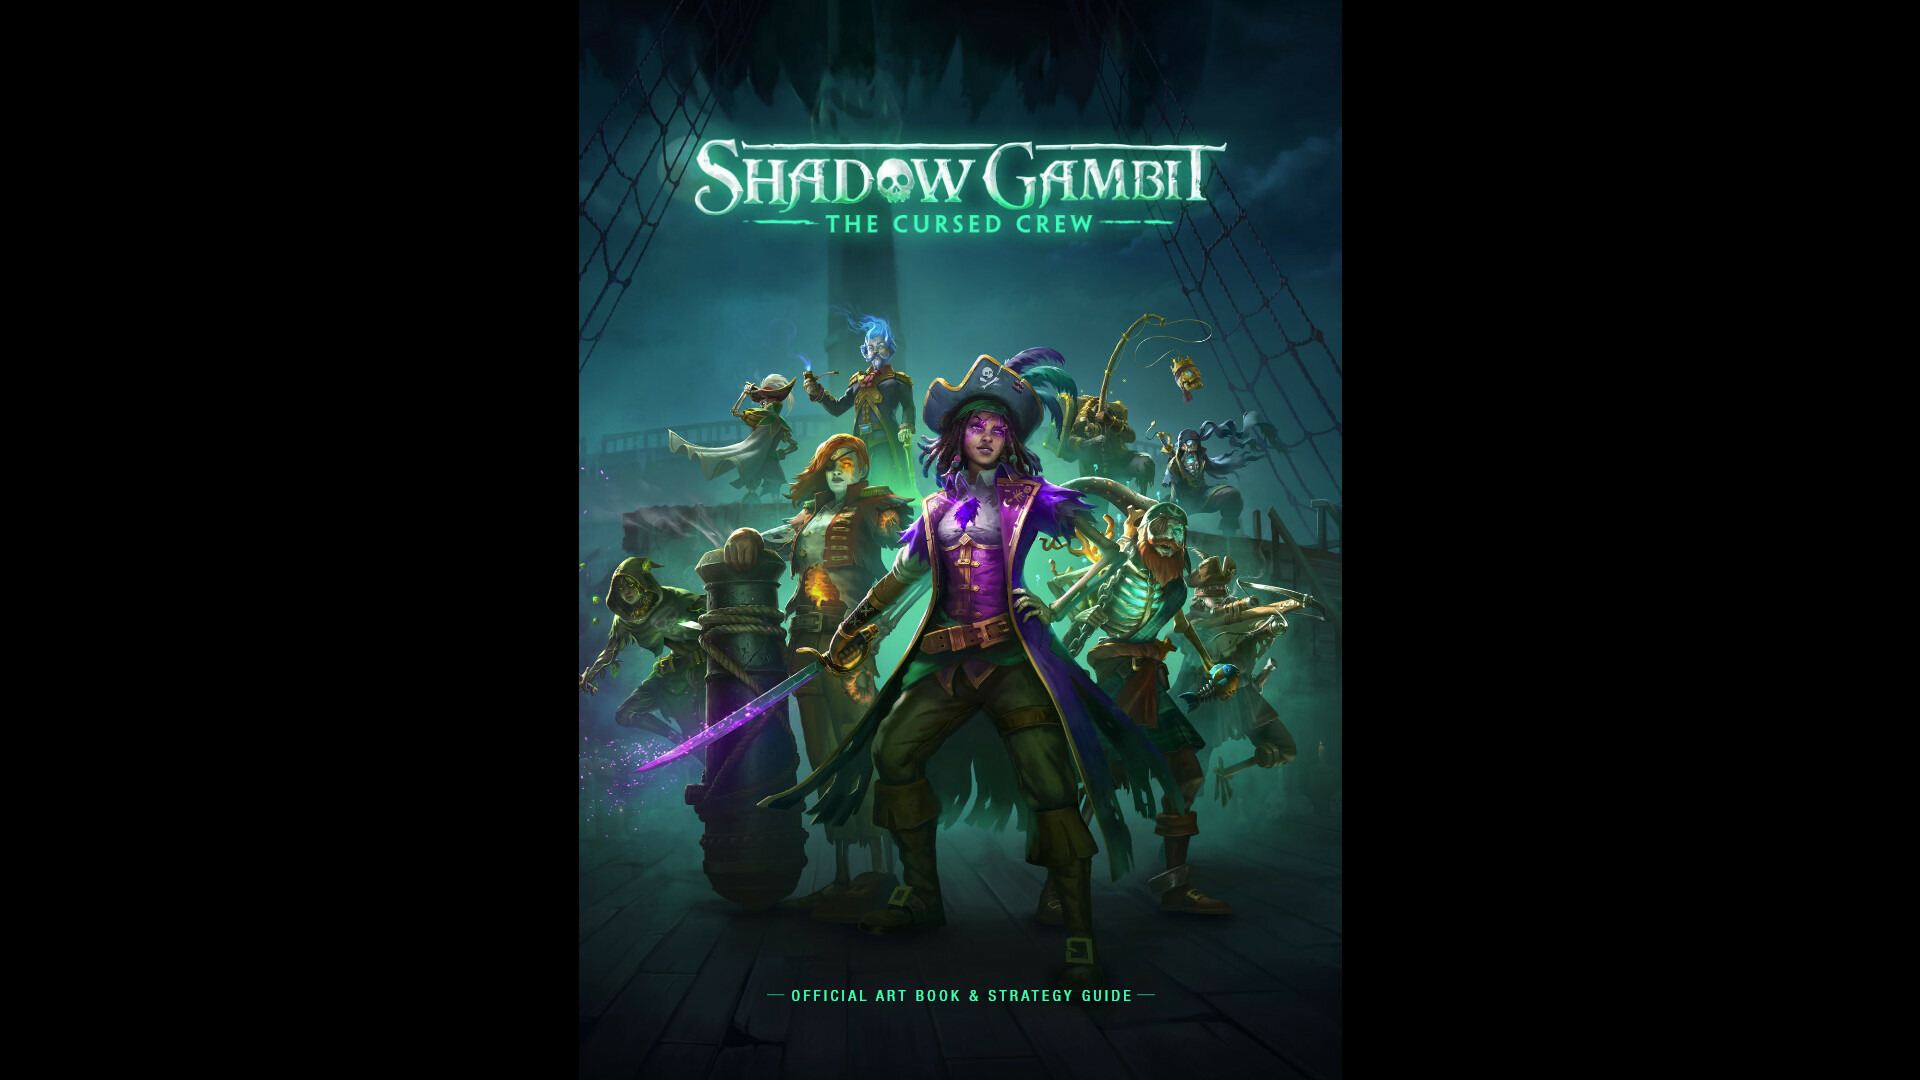 Shadow Gambit: The Cursed Crew Supporter Edition Epic Games Account, 31.53 usd